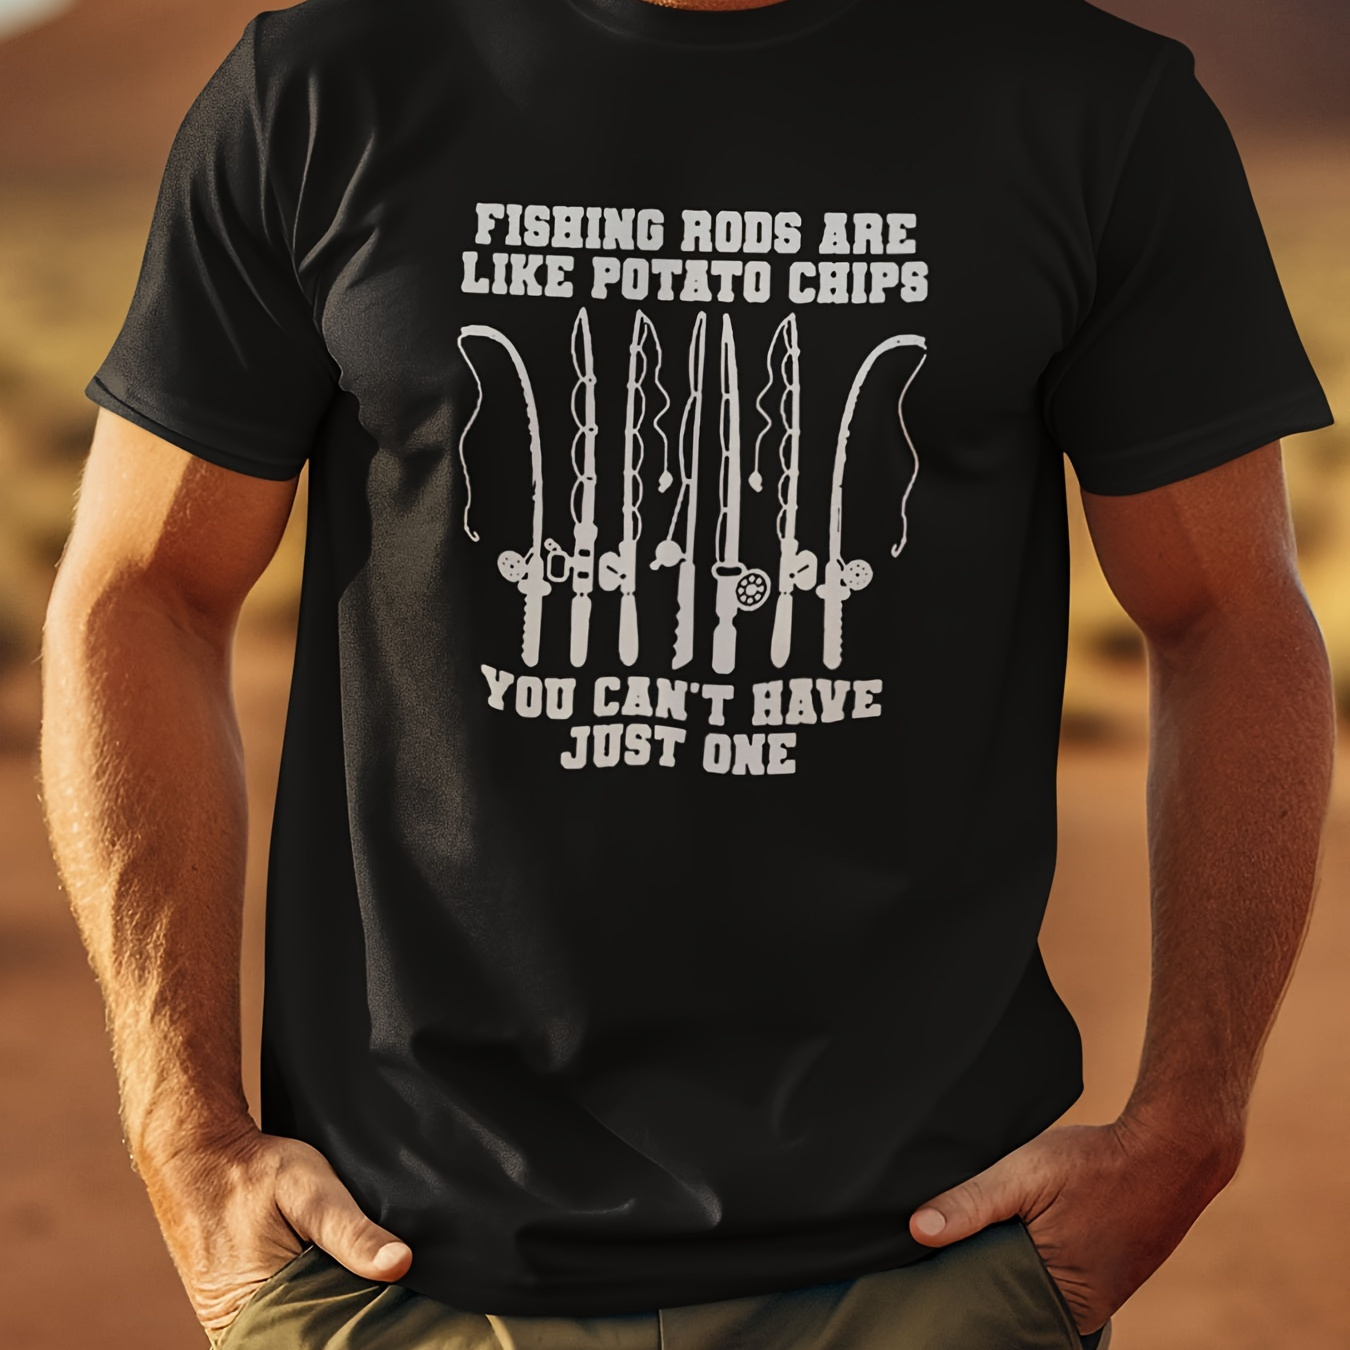 

'fishing Rods Are Like Potato Chips' - Men's Front Printed Short-sleeved T-shirt - Funny Fishing Tees - Ideal Birthday Gift For Dad, Husband, Grandpa